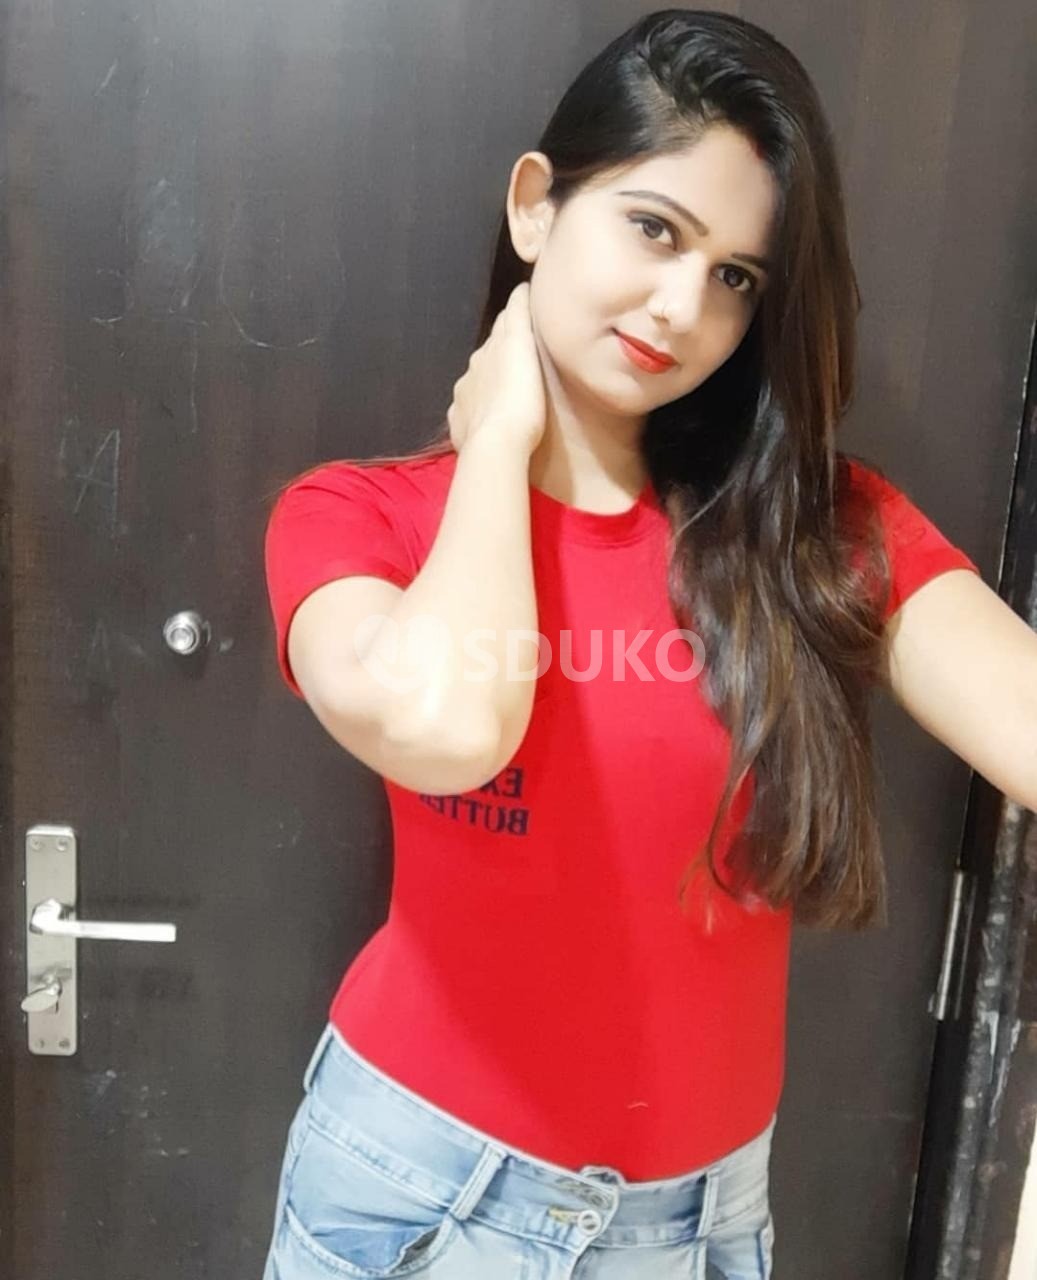 Ludhiana ☎️ VIP LOW RATE (Kavya) ESCORT FULL HARD FUCK WITH NAUGHTY IF YOU WANT TO FUCK MY PUSSY WITH BIG BOOBS GIRL